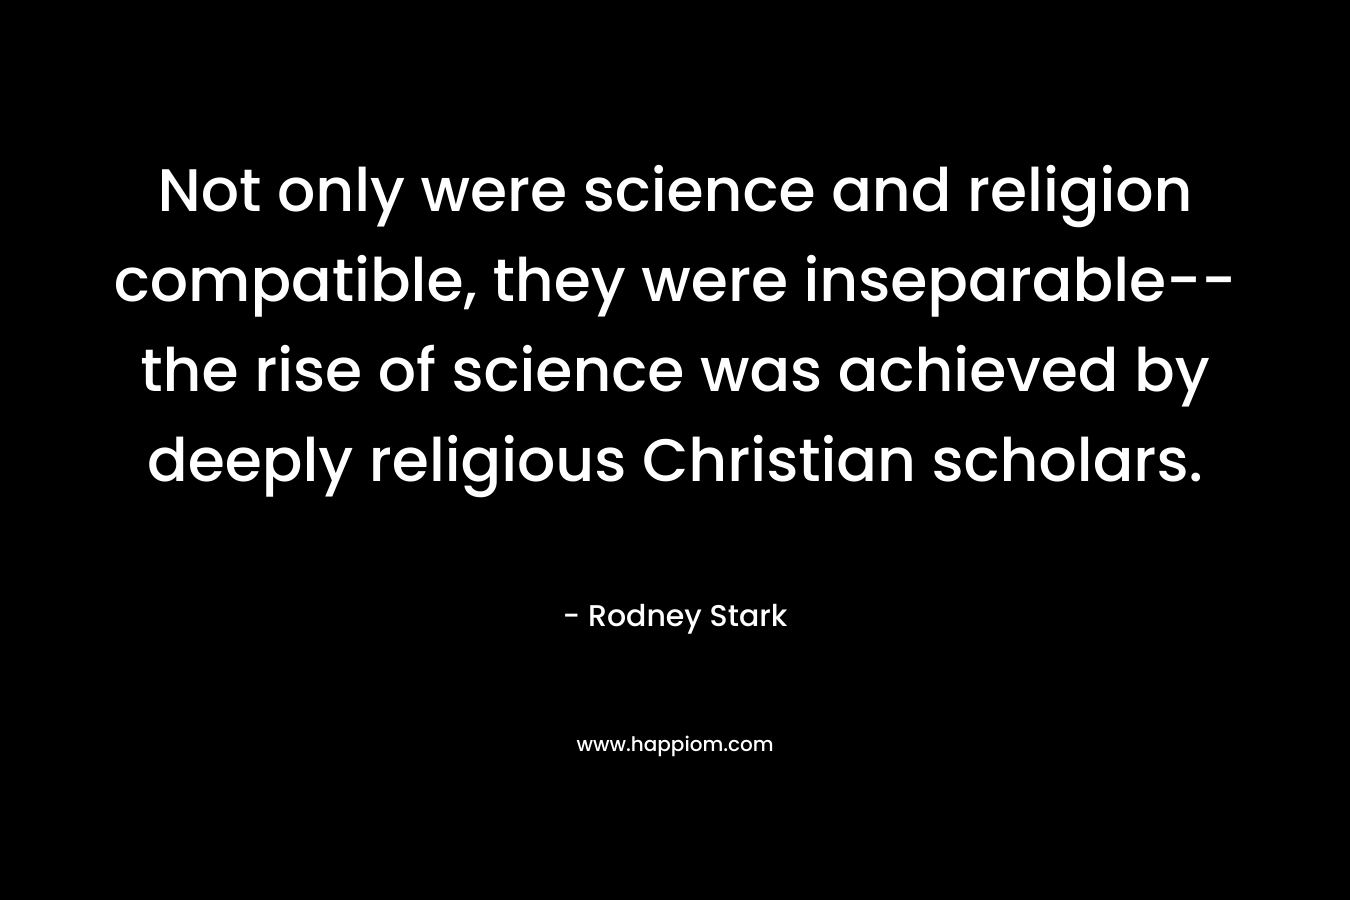 Not only were science and religion compatible, they were inseparable--the rise of science was achieved by deeply religious Christian scholars. 